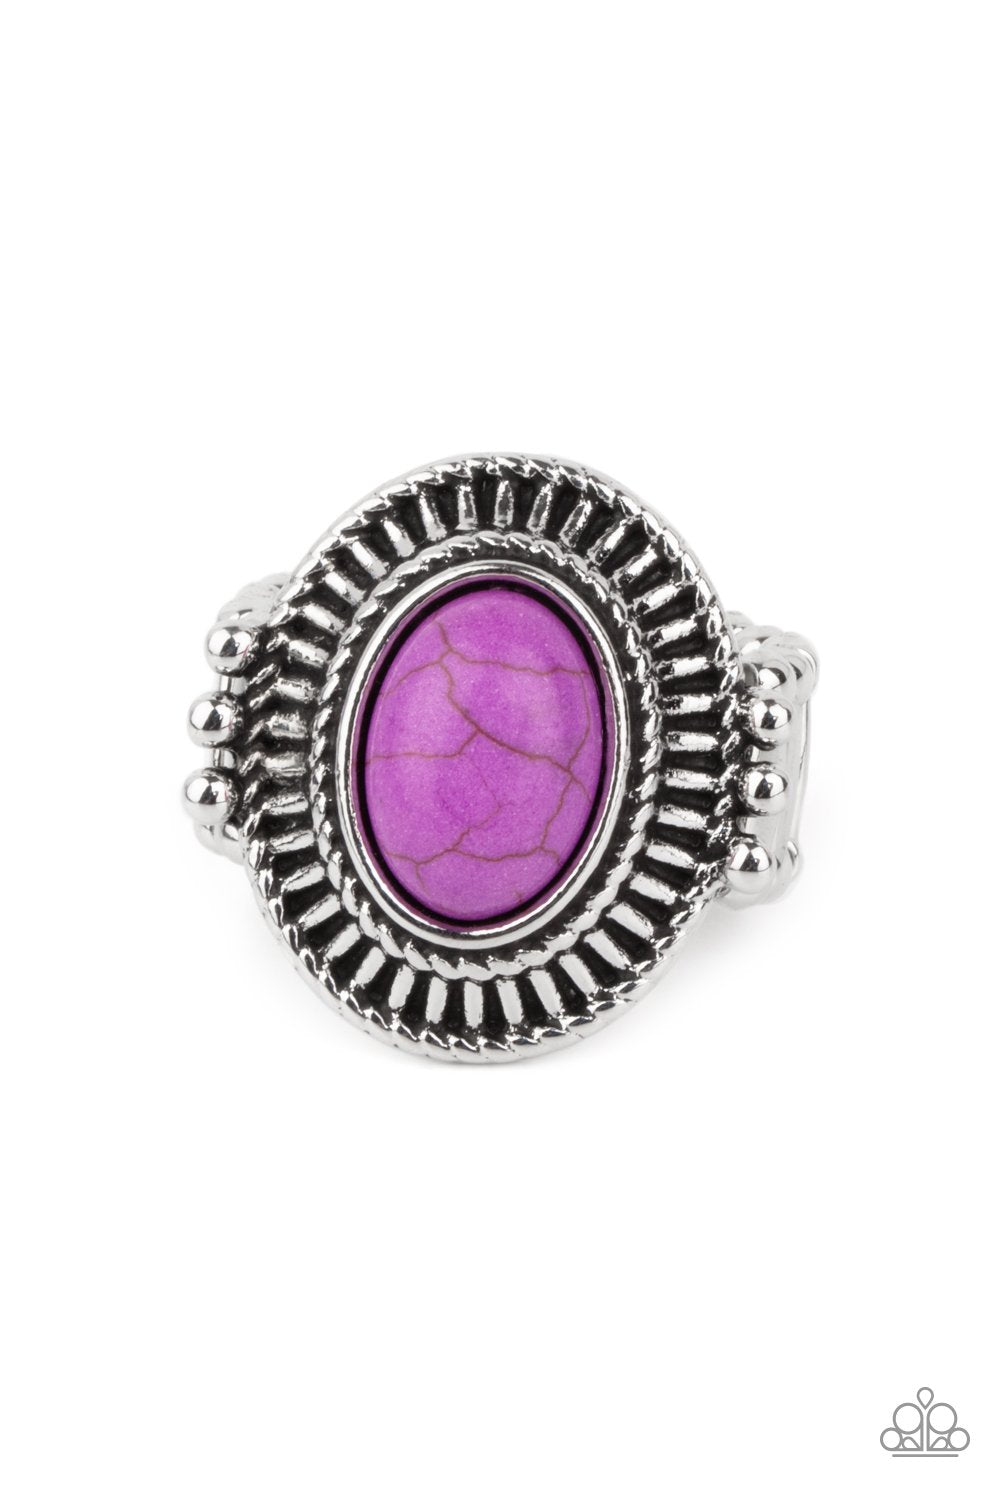 BADLANDS To The Bone Purple Stone Ring - Paparazzi Accessories- lightbox - CarasShop.com - $5 Jewelry by Cara Jewels